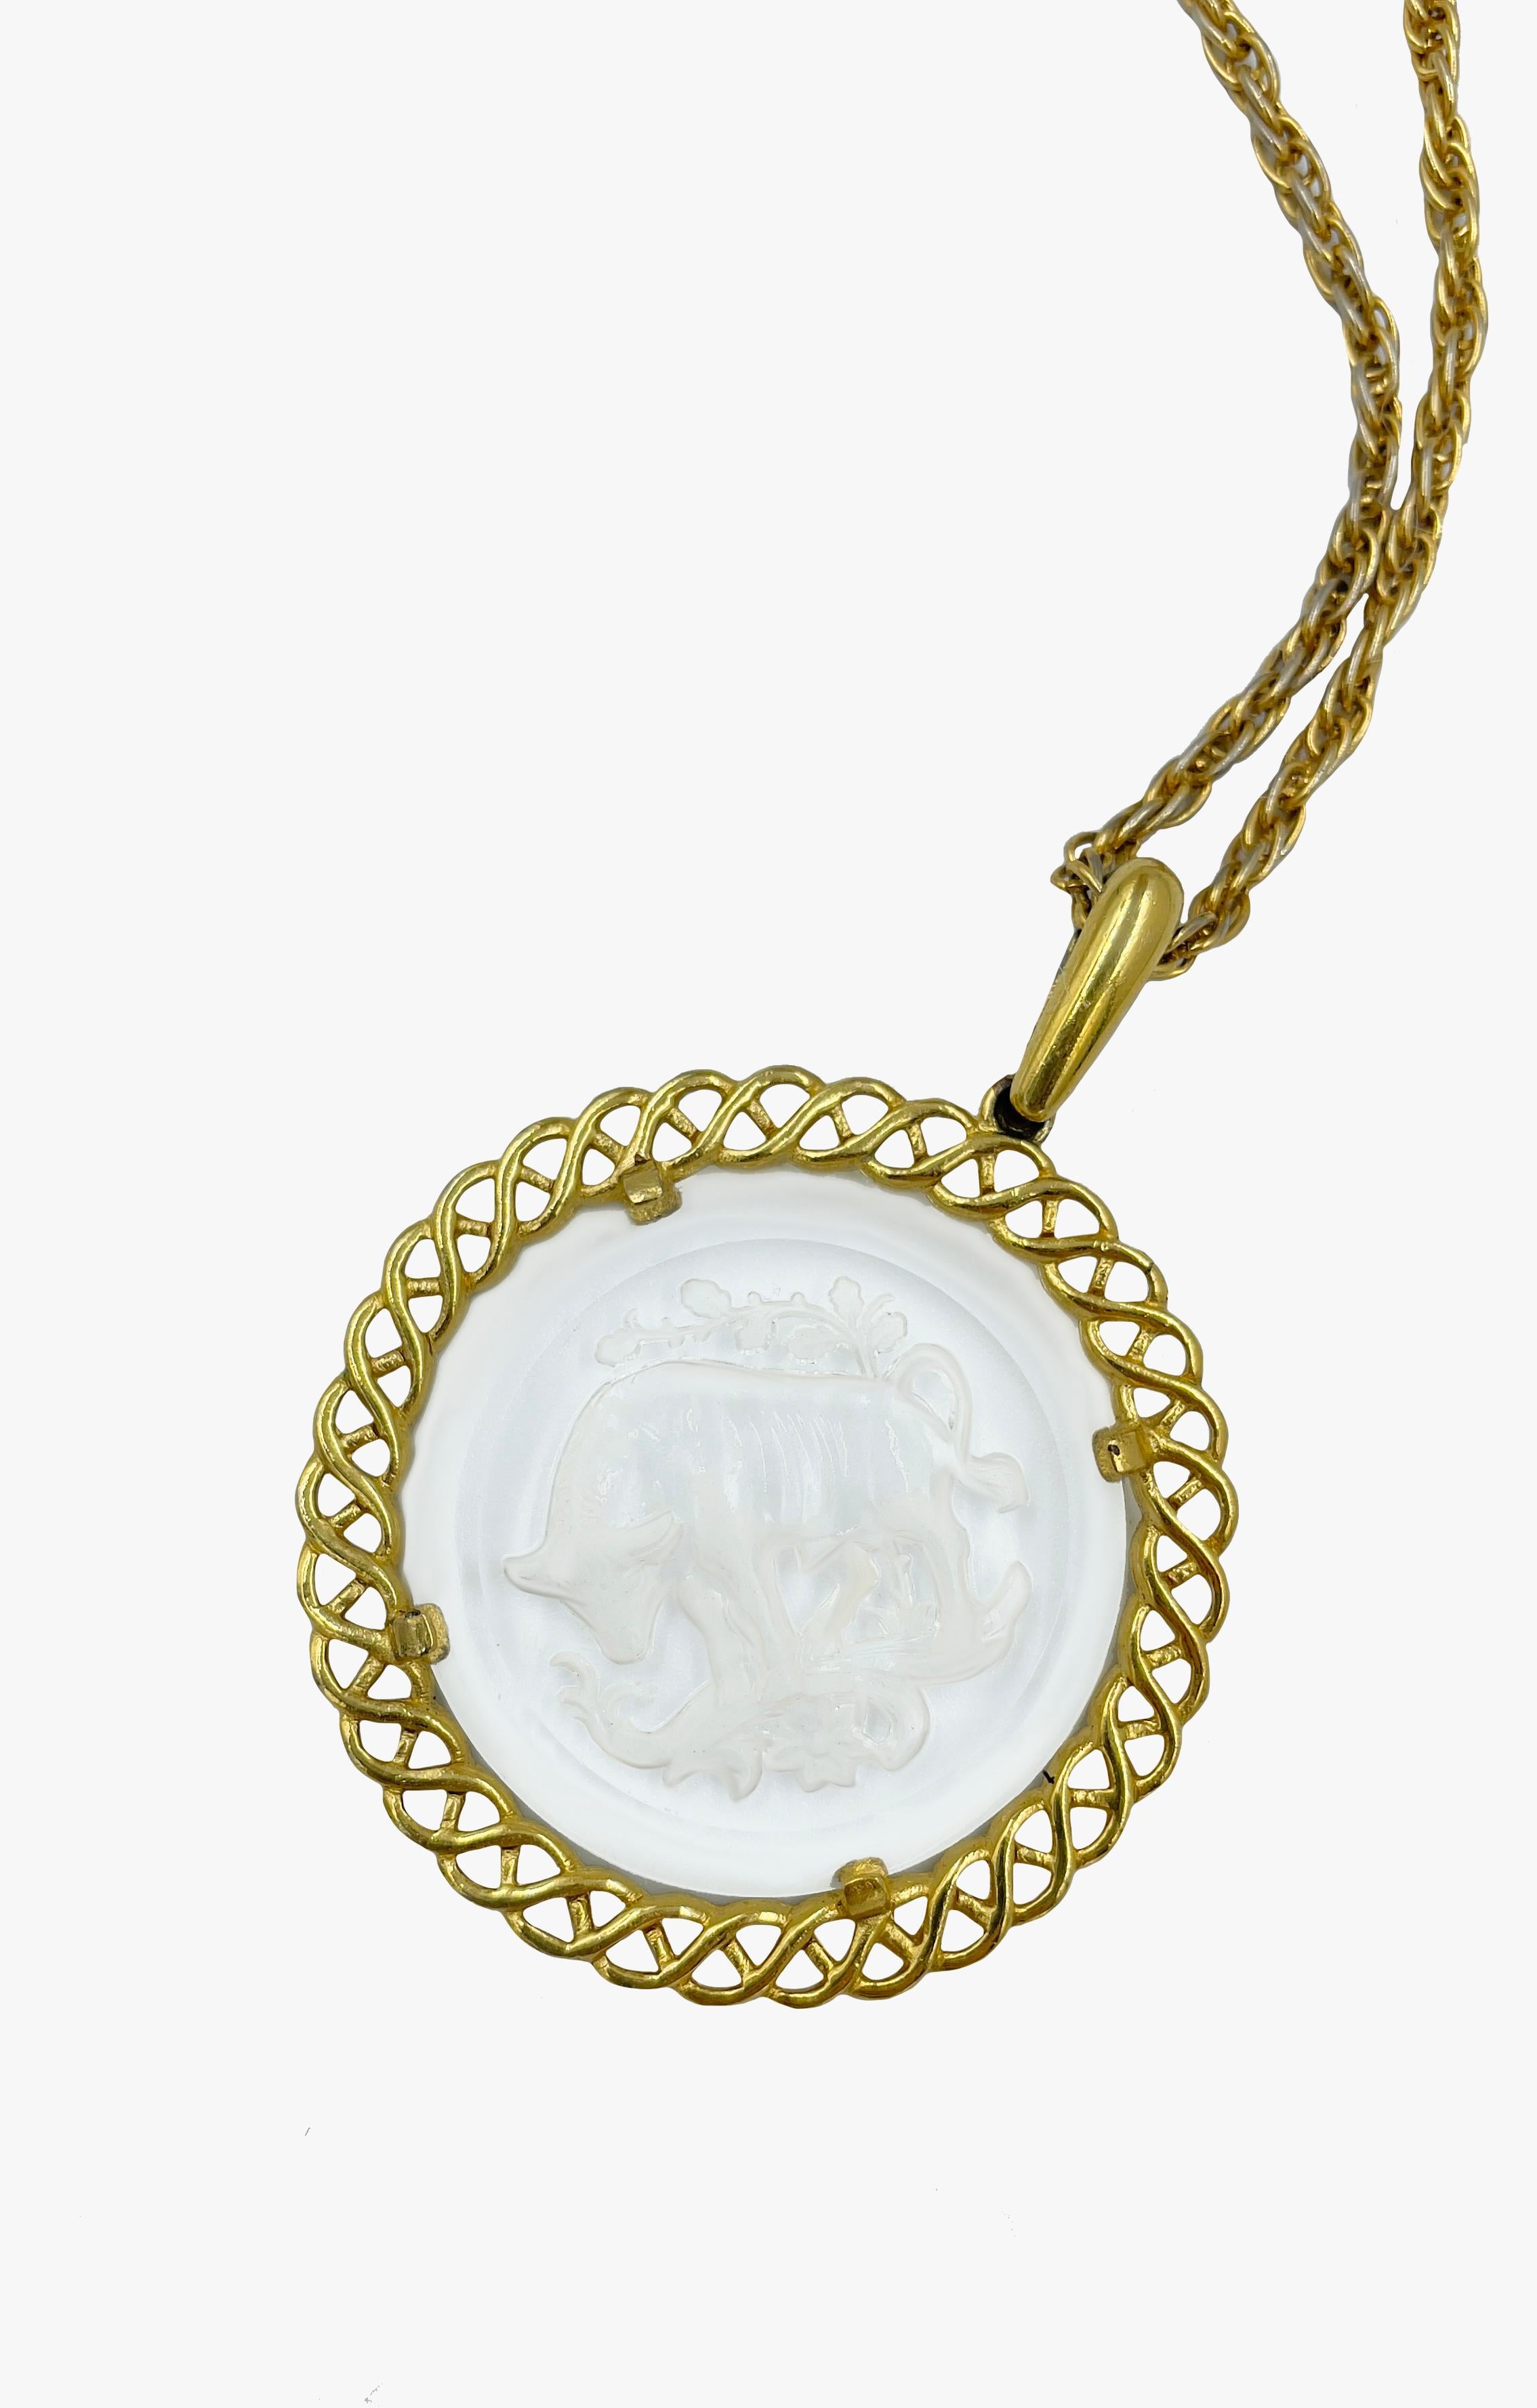 Vintage Trifari glass medallion in a gold tone metal frame on a chain

Signed

Medallion diameter – 4.5 cm

The length of the chain when fastened is 22.5 cm

Condition – very good

